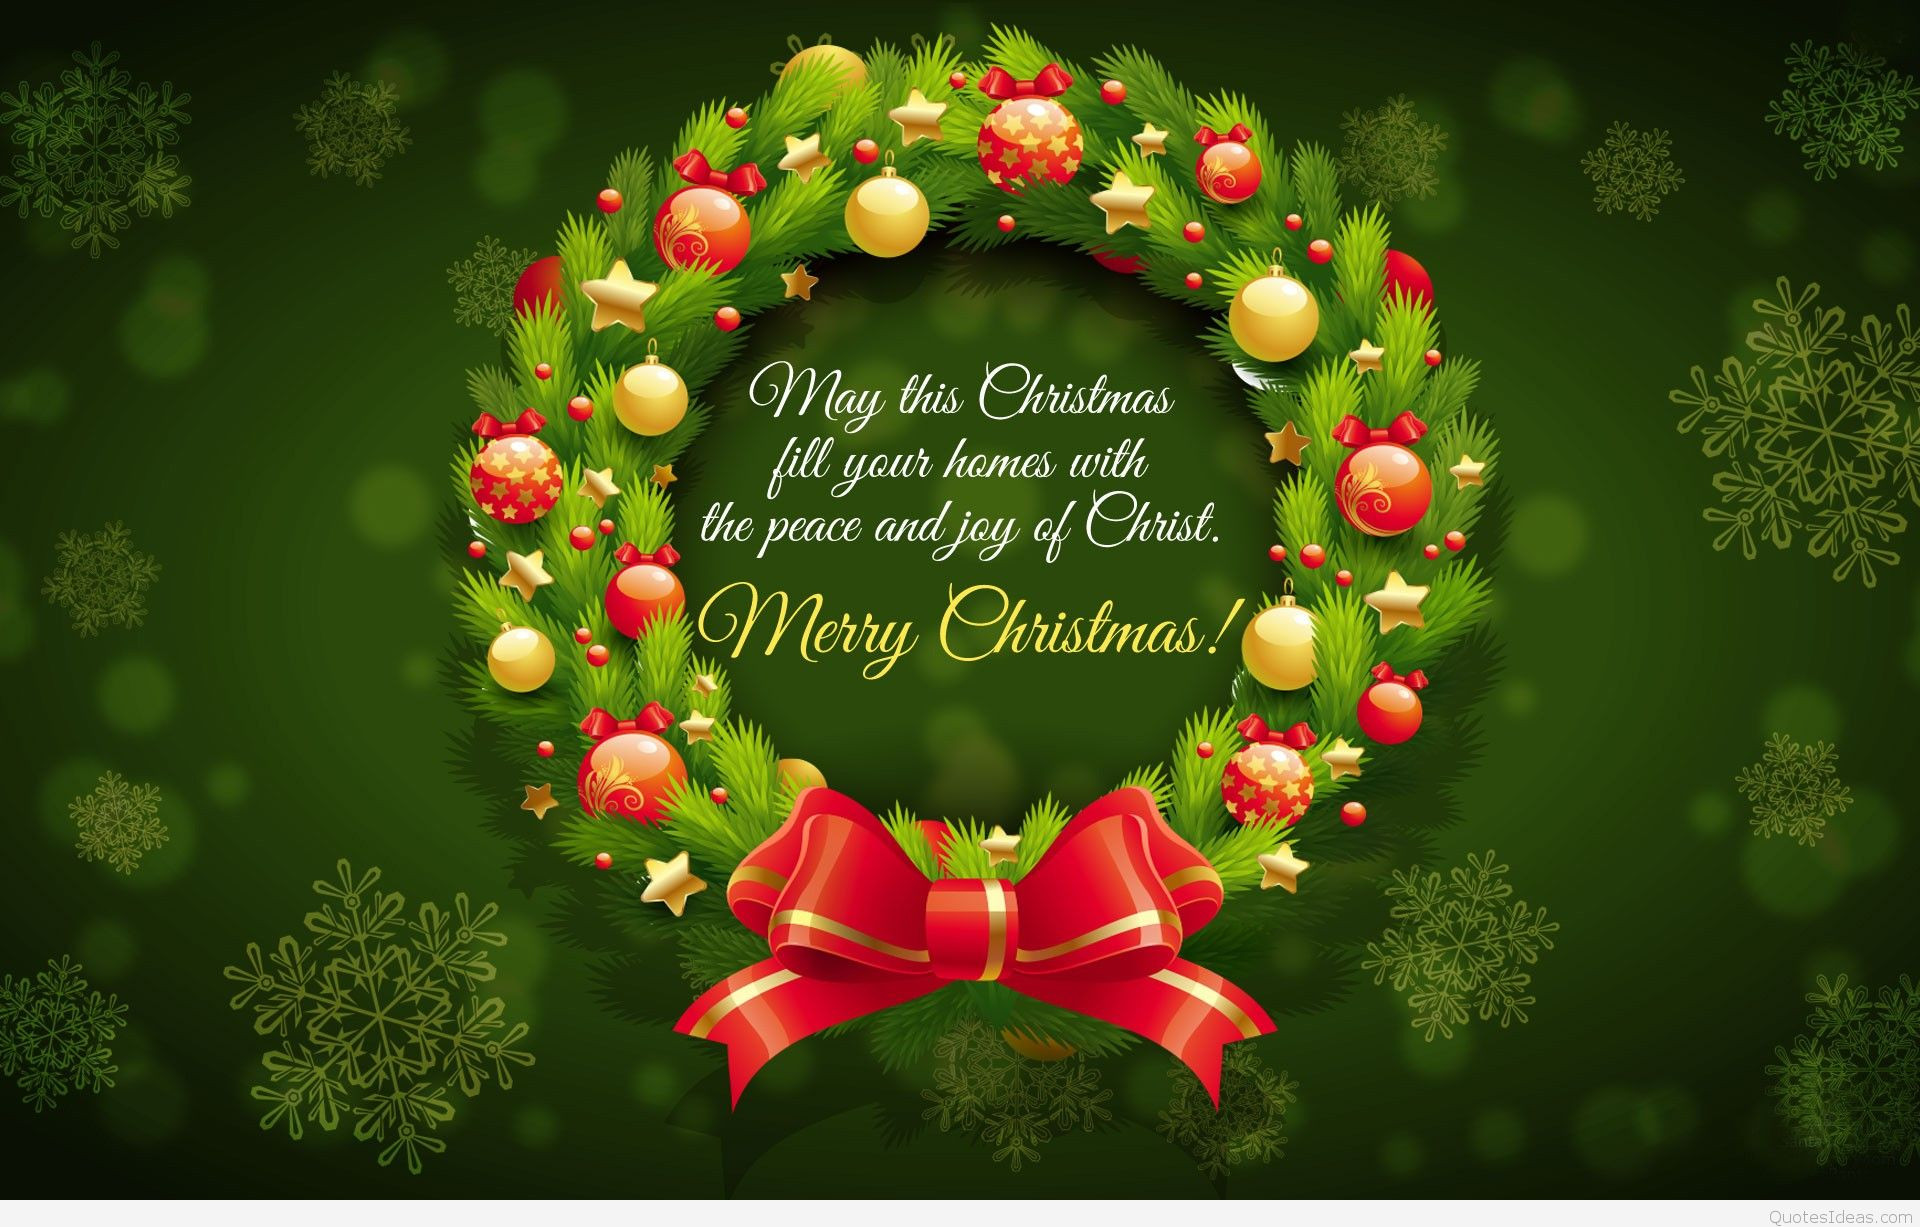 Merry Christmas Quotes And Images
 Merry Christmas Spiritual Religious quotes wishes 2015